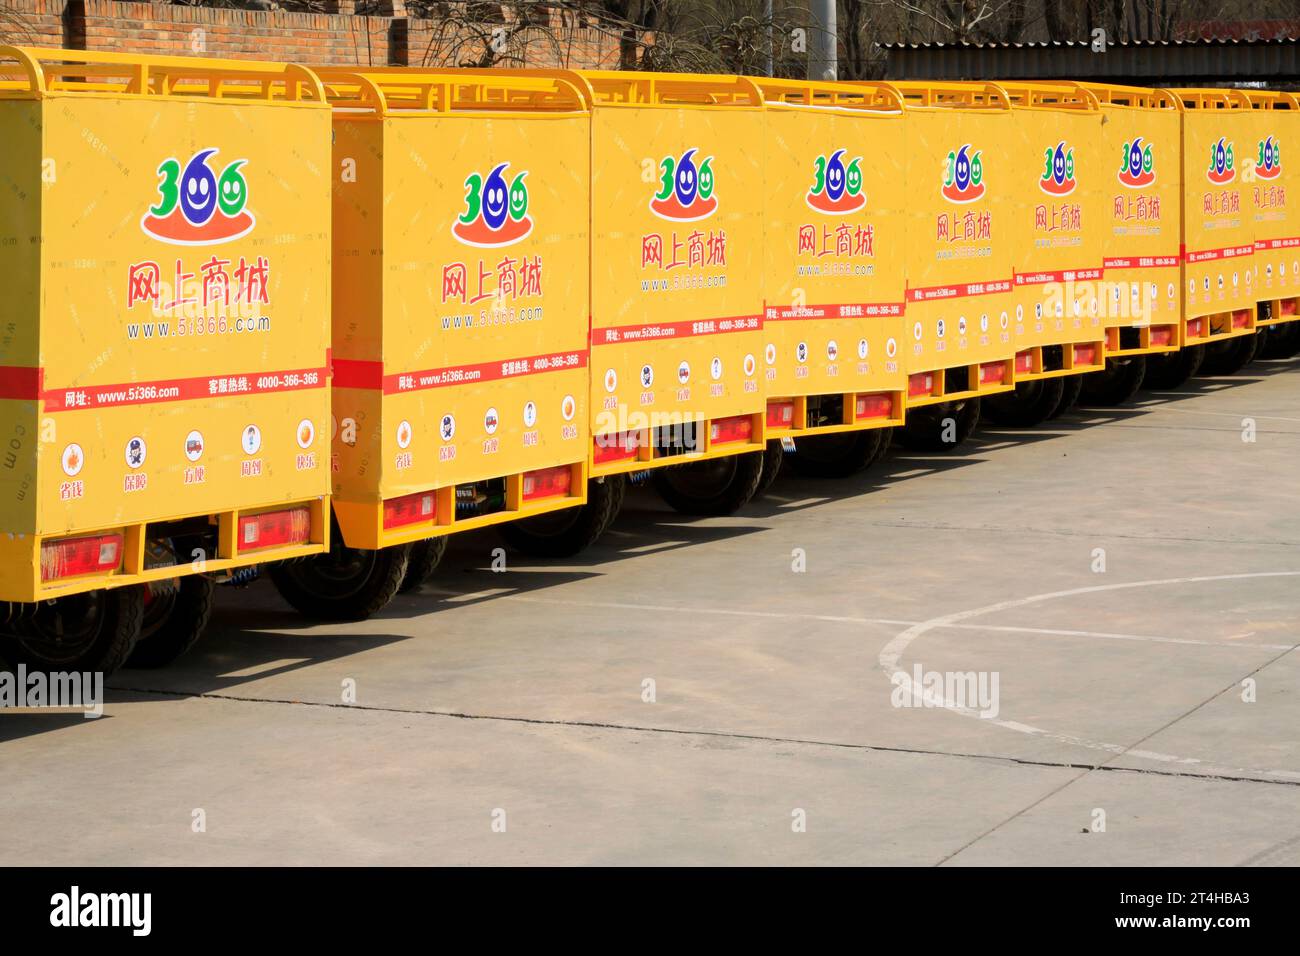 LANGFANG CITY - MARCH 12: 366 online shop delivery ehicle cart, March 12, 2015, Langfang City, Hebei Province, China. Stock Photo